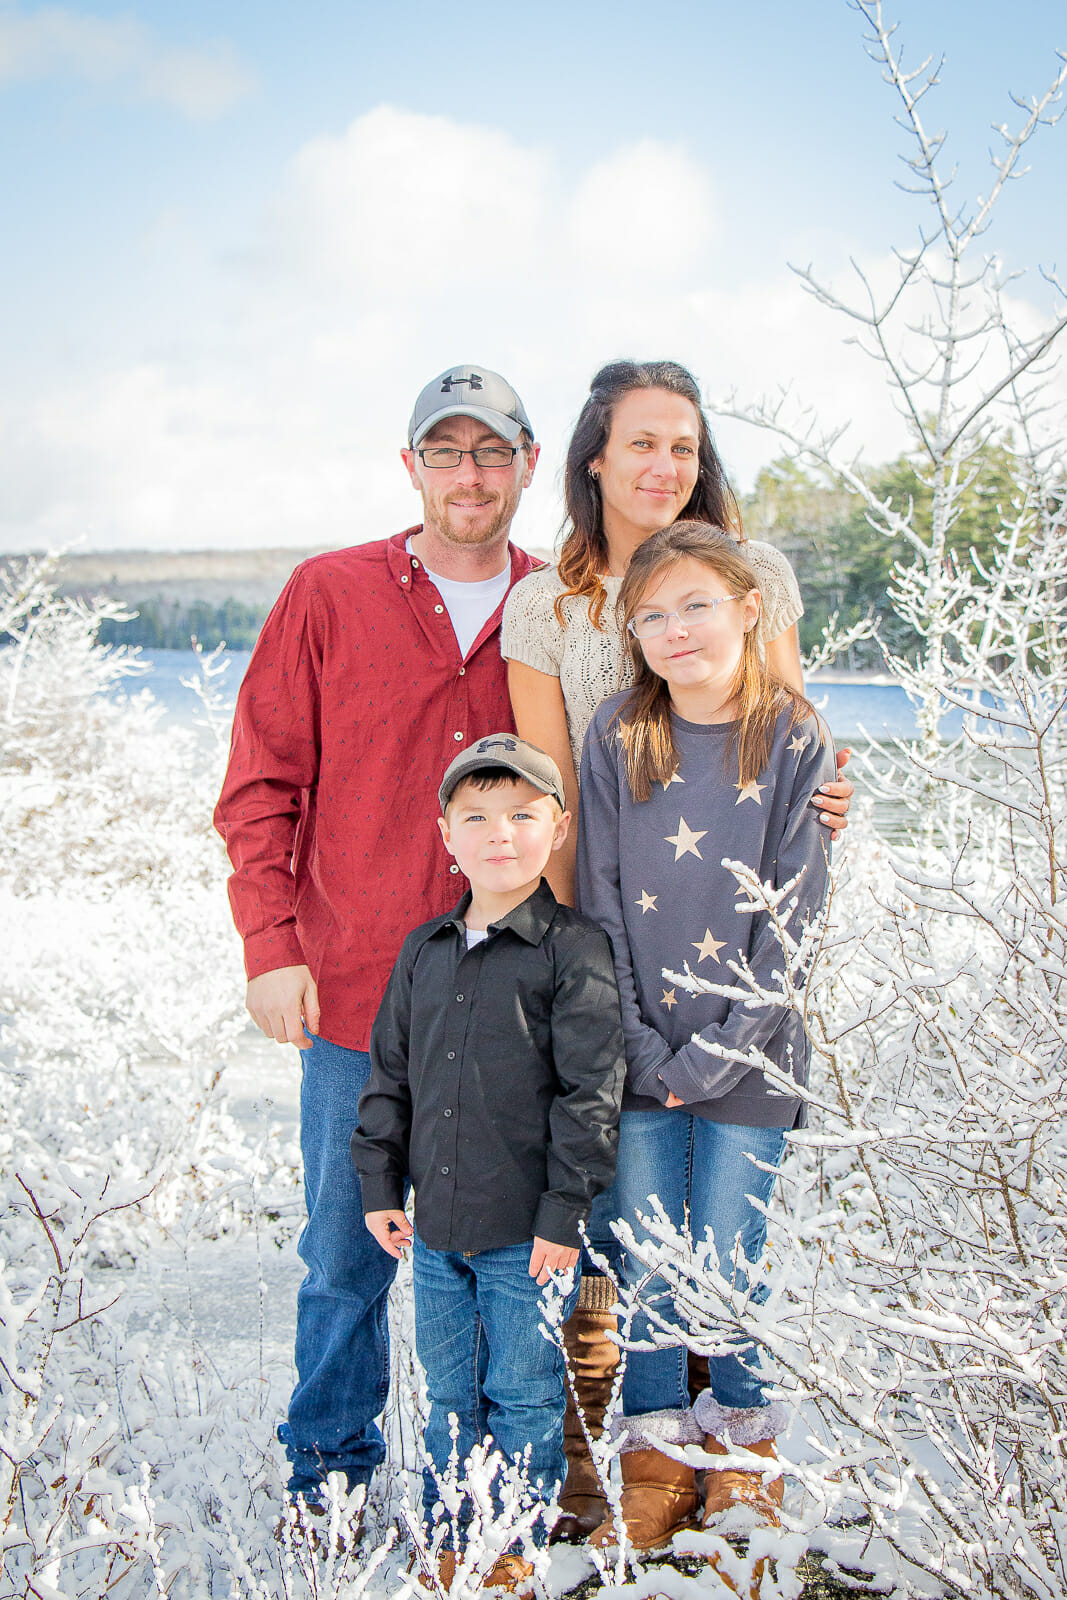 A photo from the Gillis Family Photoshoot, shot in Mickey Hill, Nova Scotia on a chilly winter morning